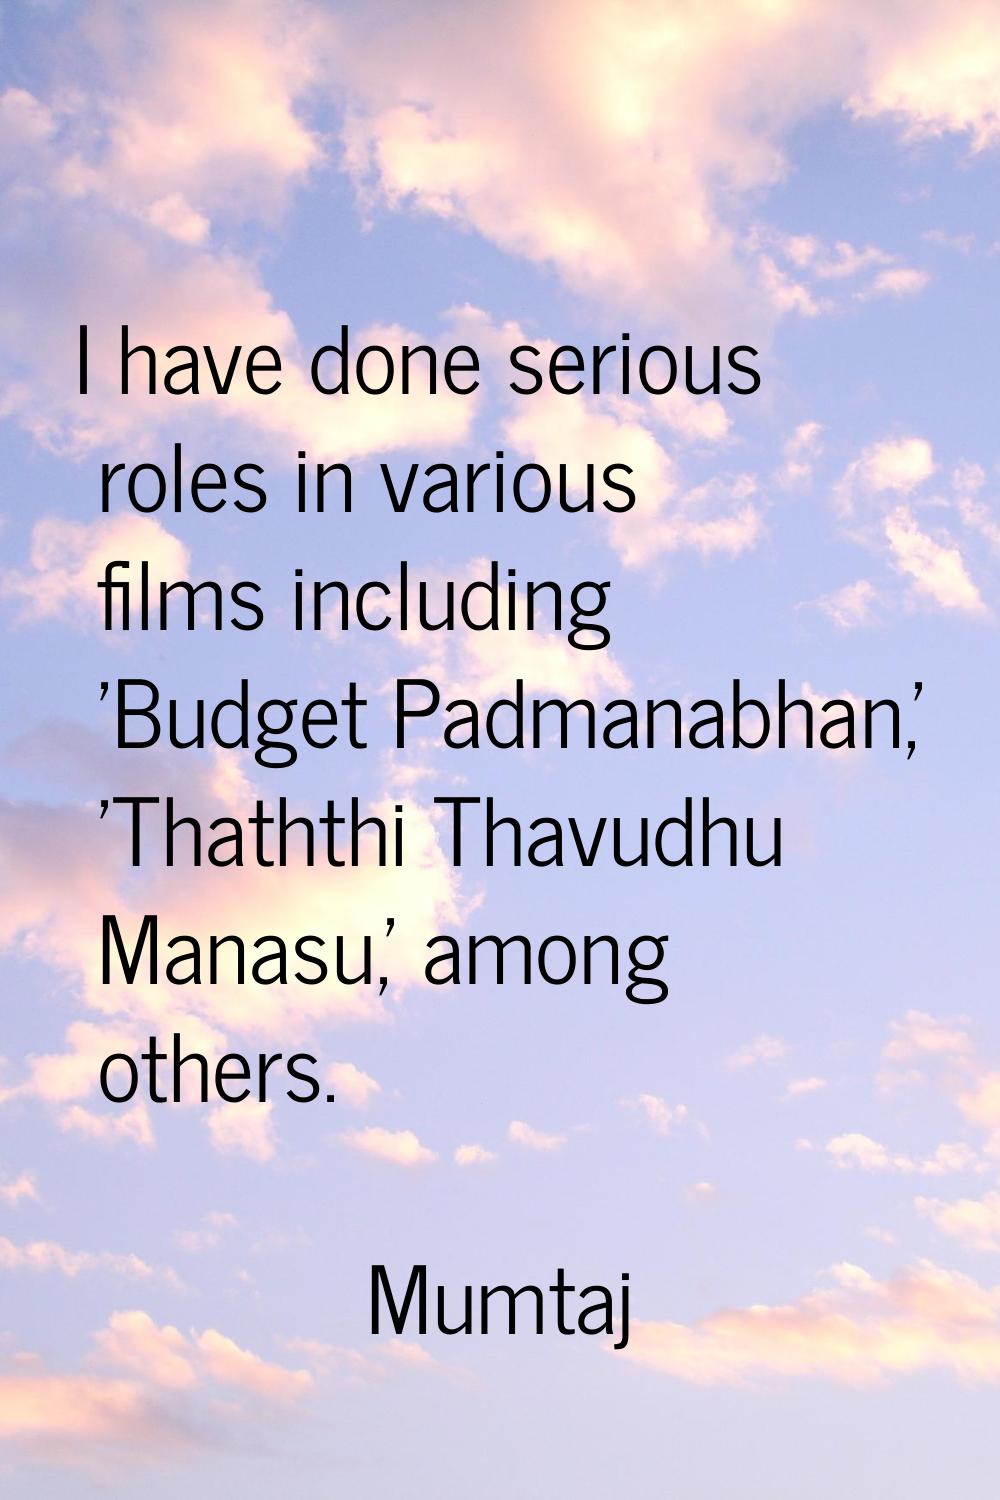 I have done serious roles in various films including 'Budget Padmanabhan,' 'Thaththi Thavudhu Manas